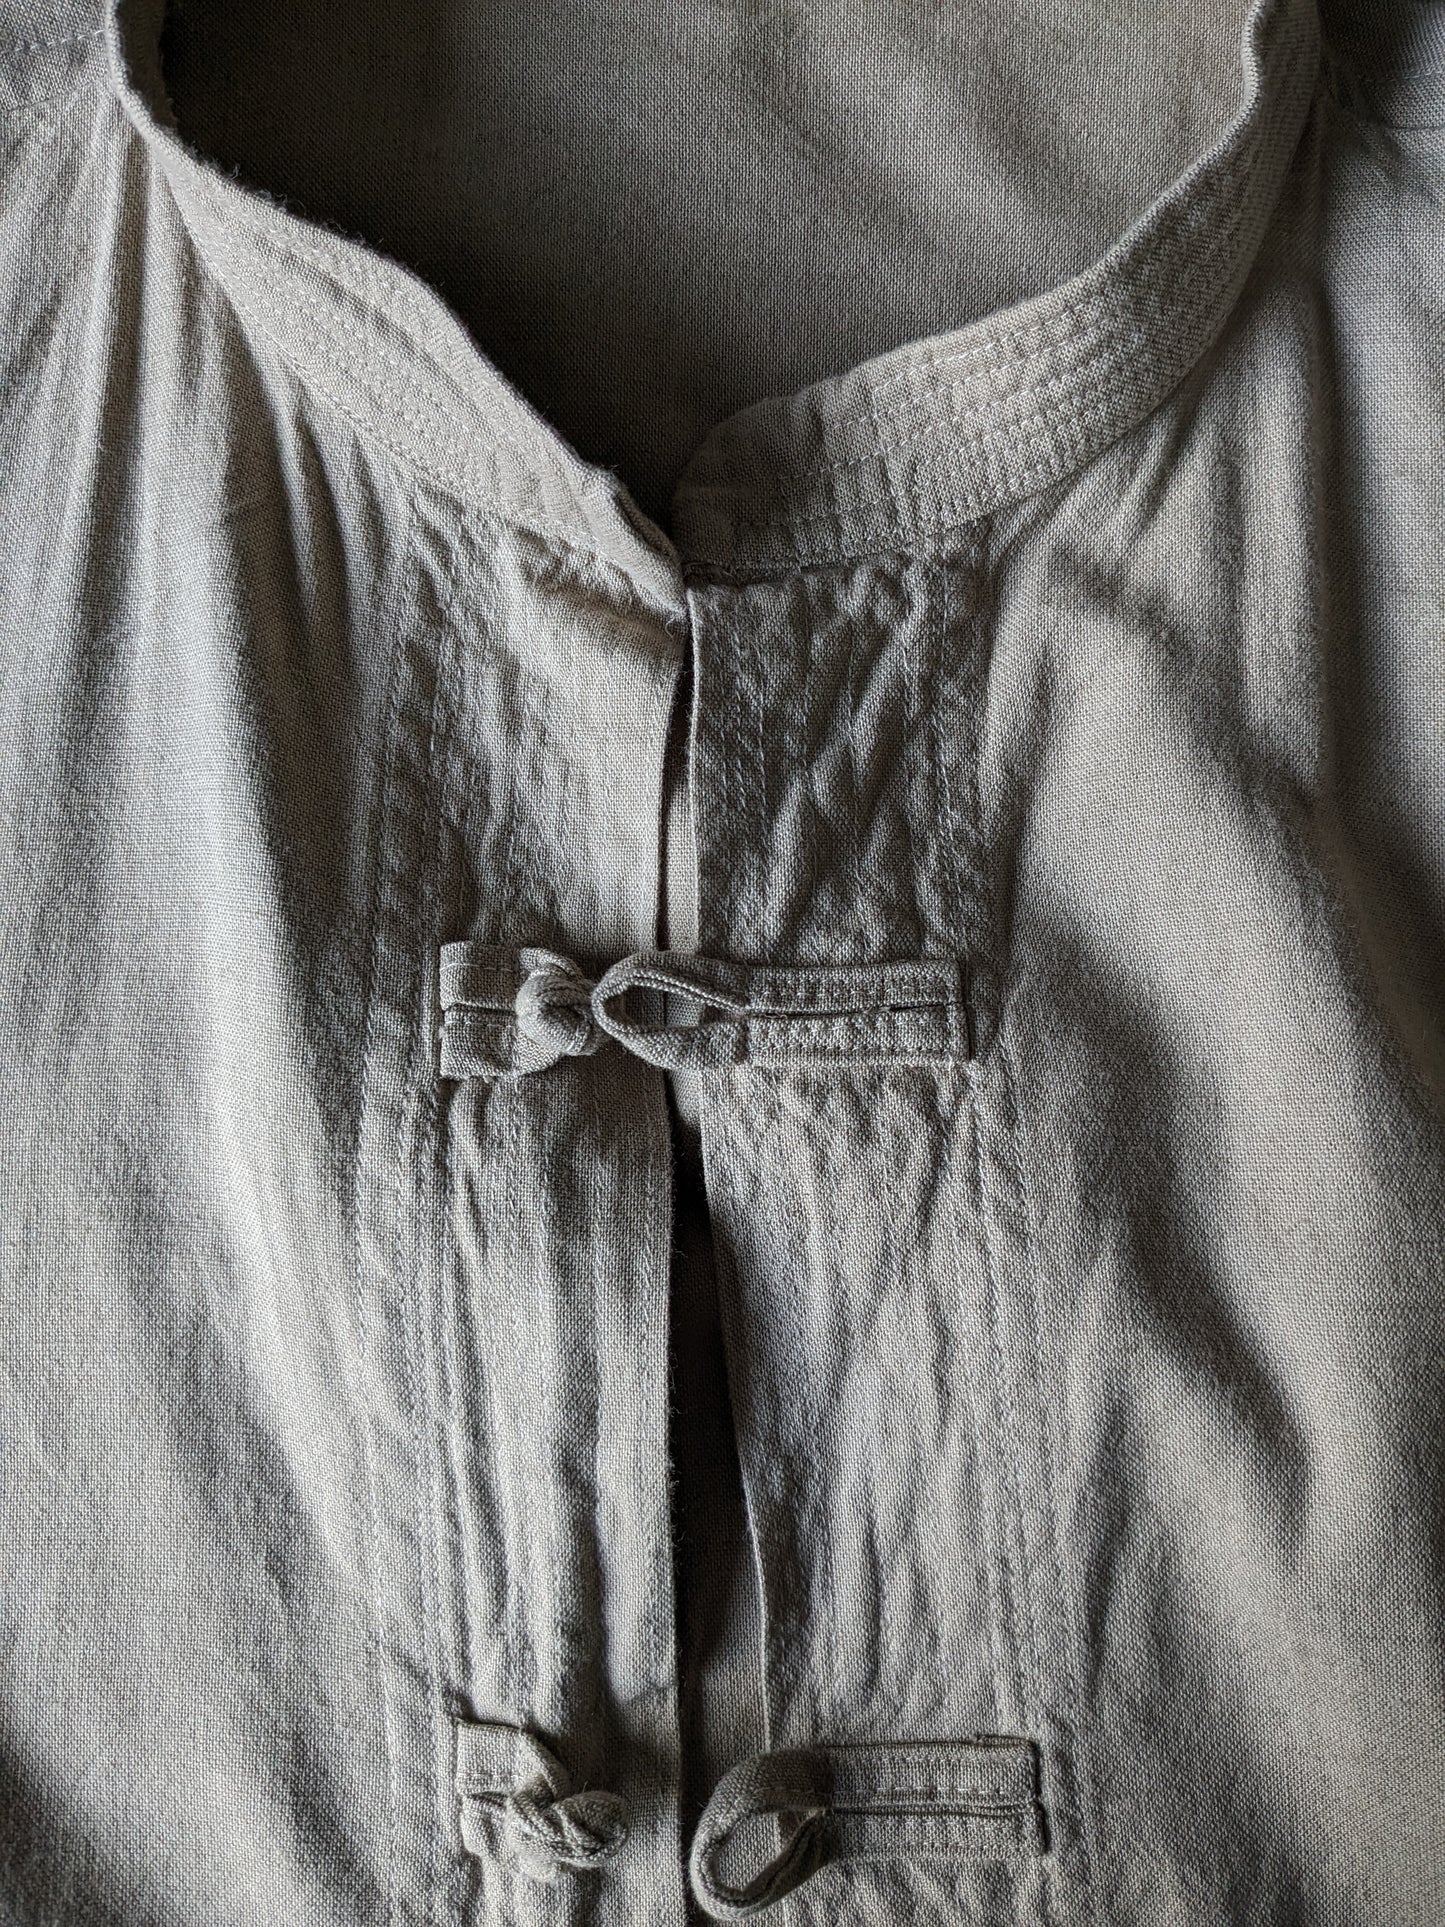 Vintage shirt with fabric buttons and mao / raised / farmer collar. Beige colored. Size 2XL / XXL.